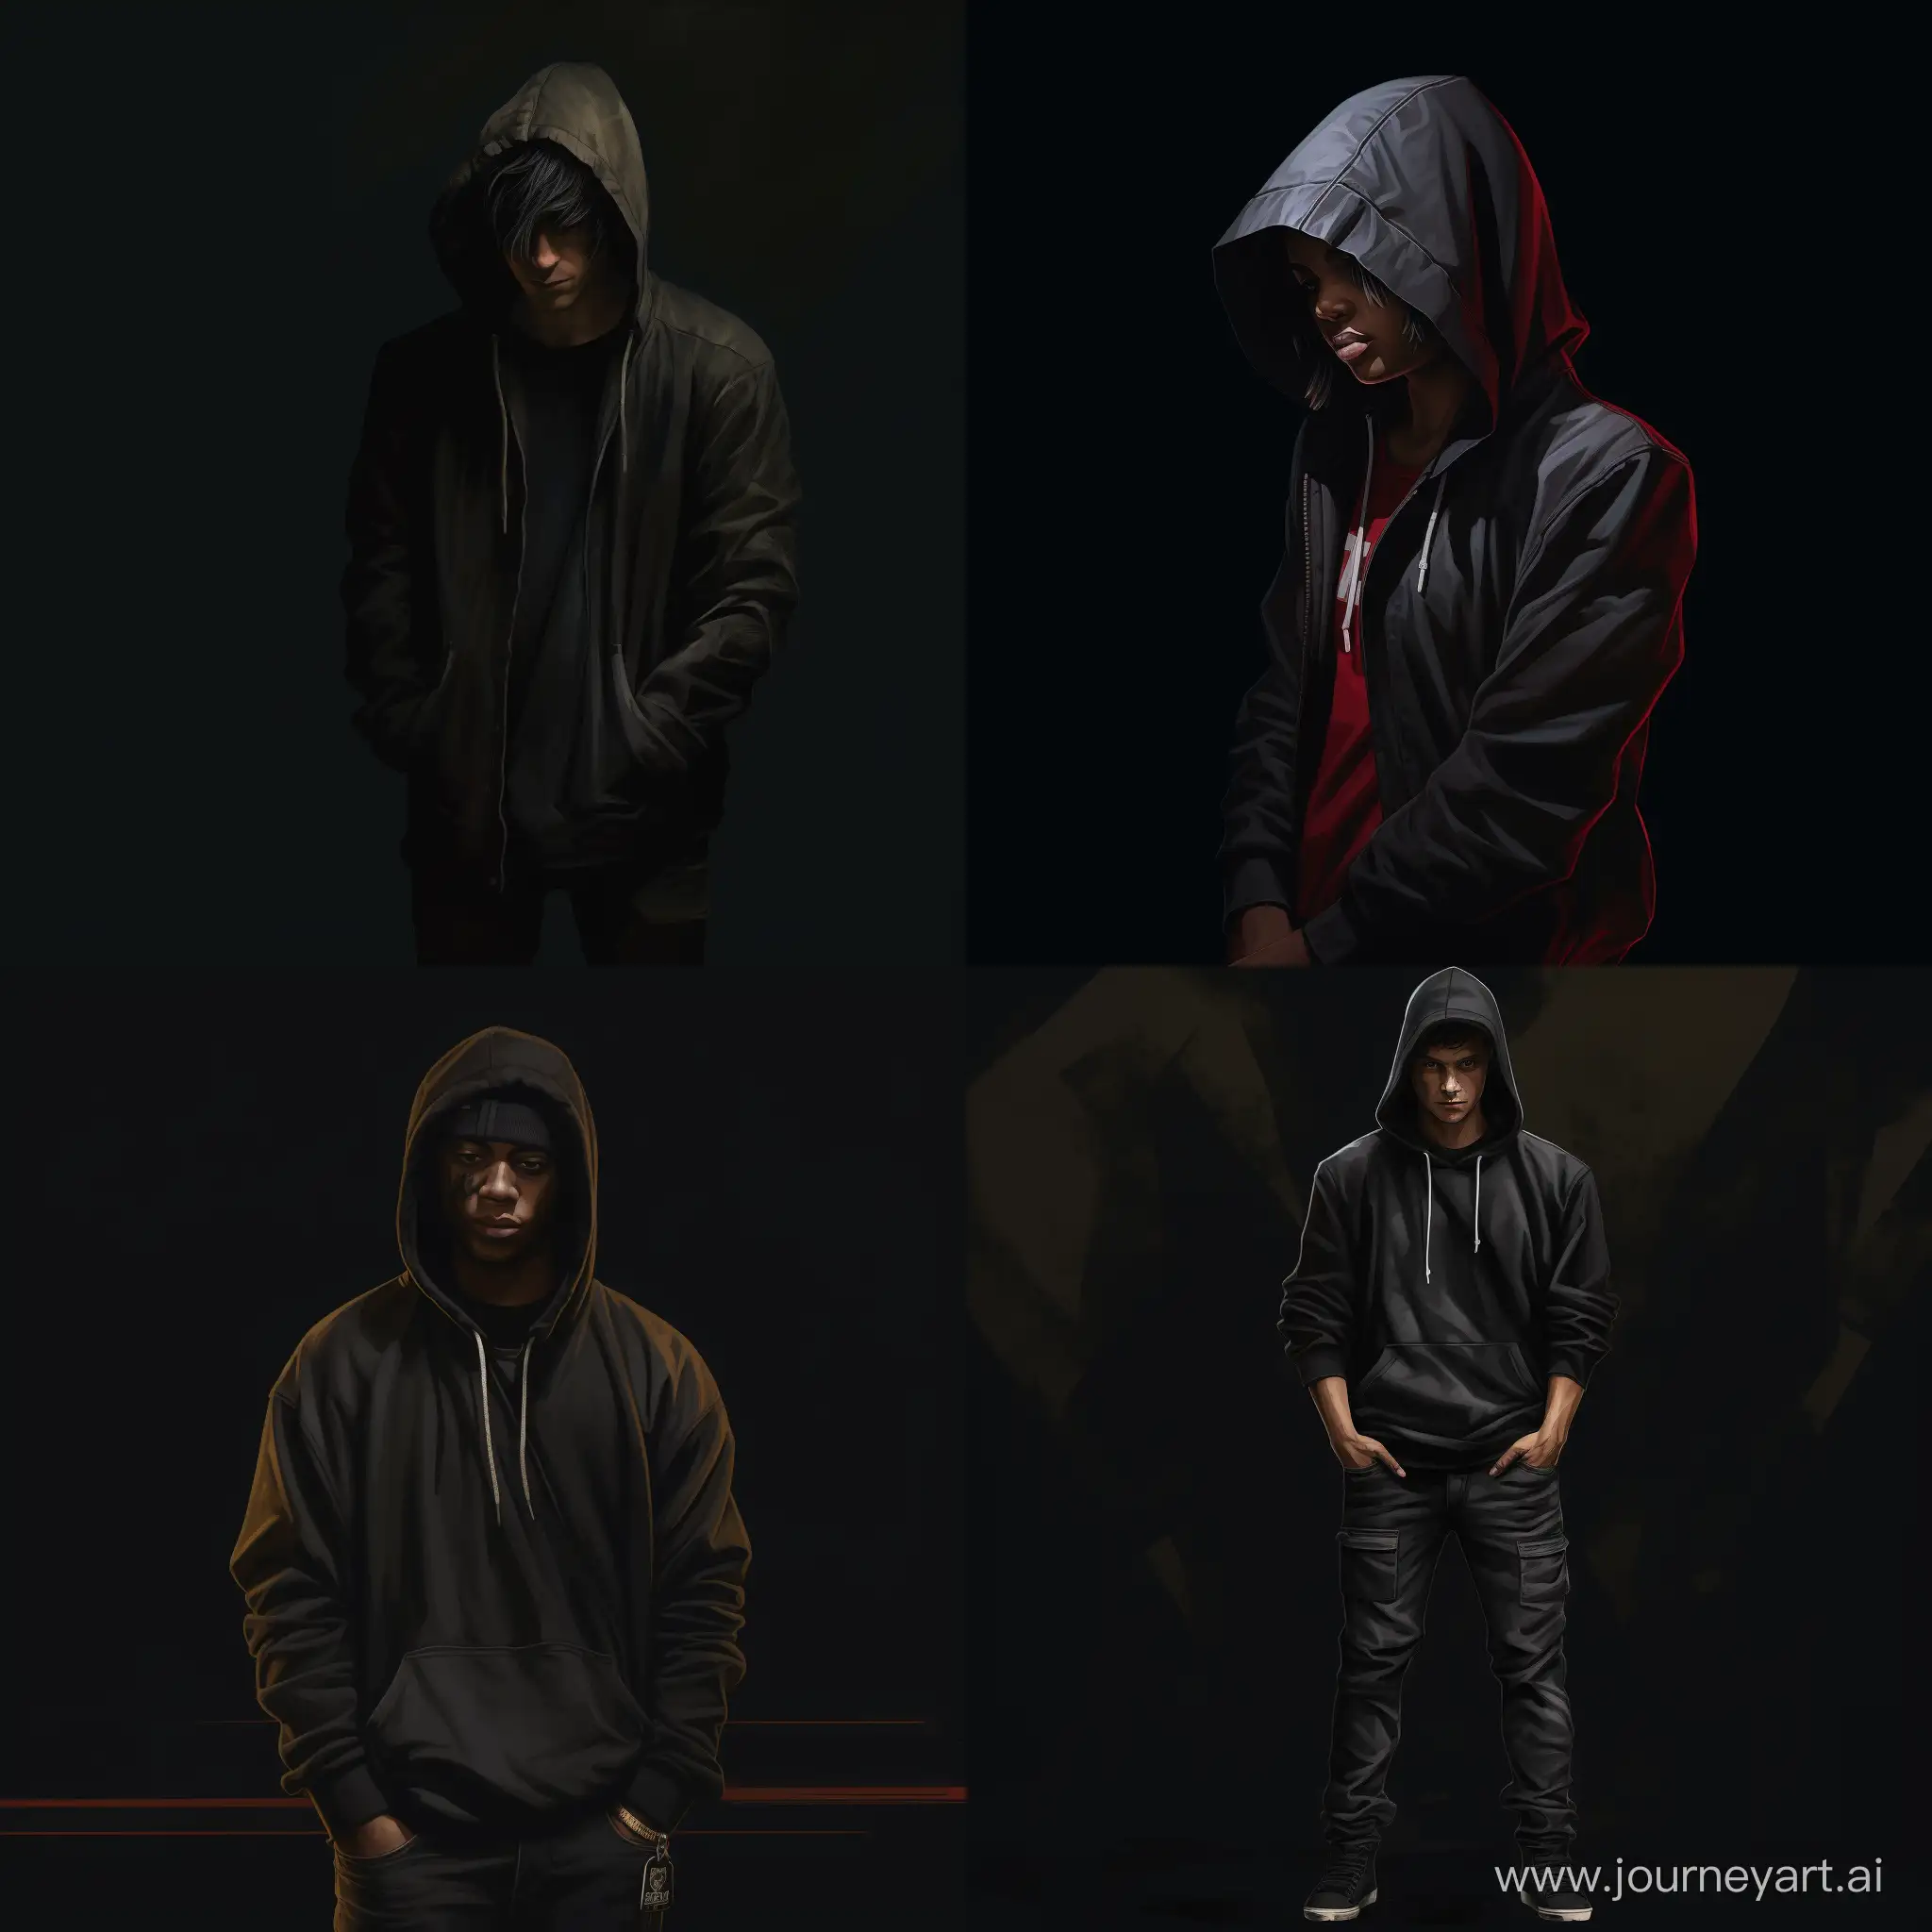 Mysterious-Figure-in-Hooded-Silhouette-on-Dark-Background